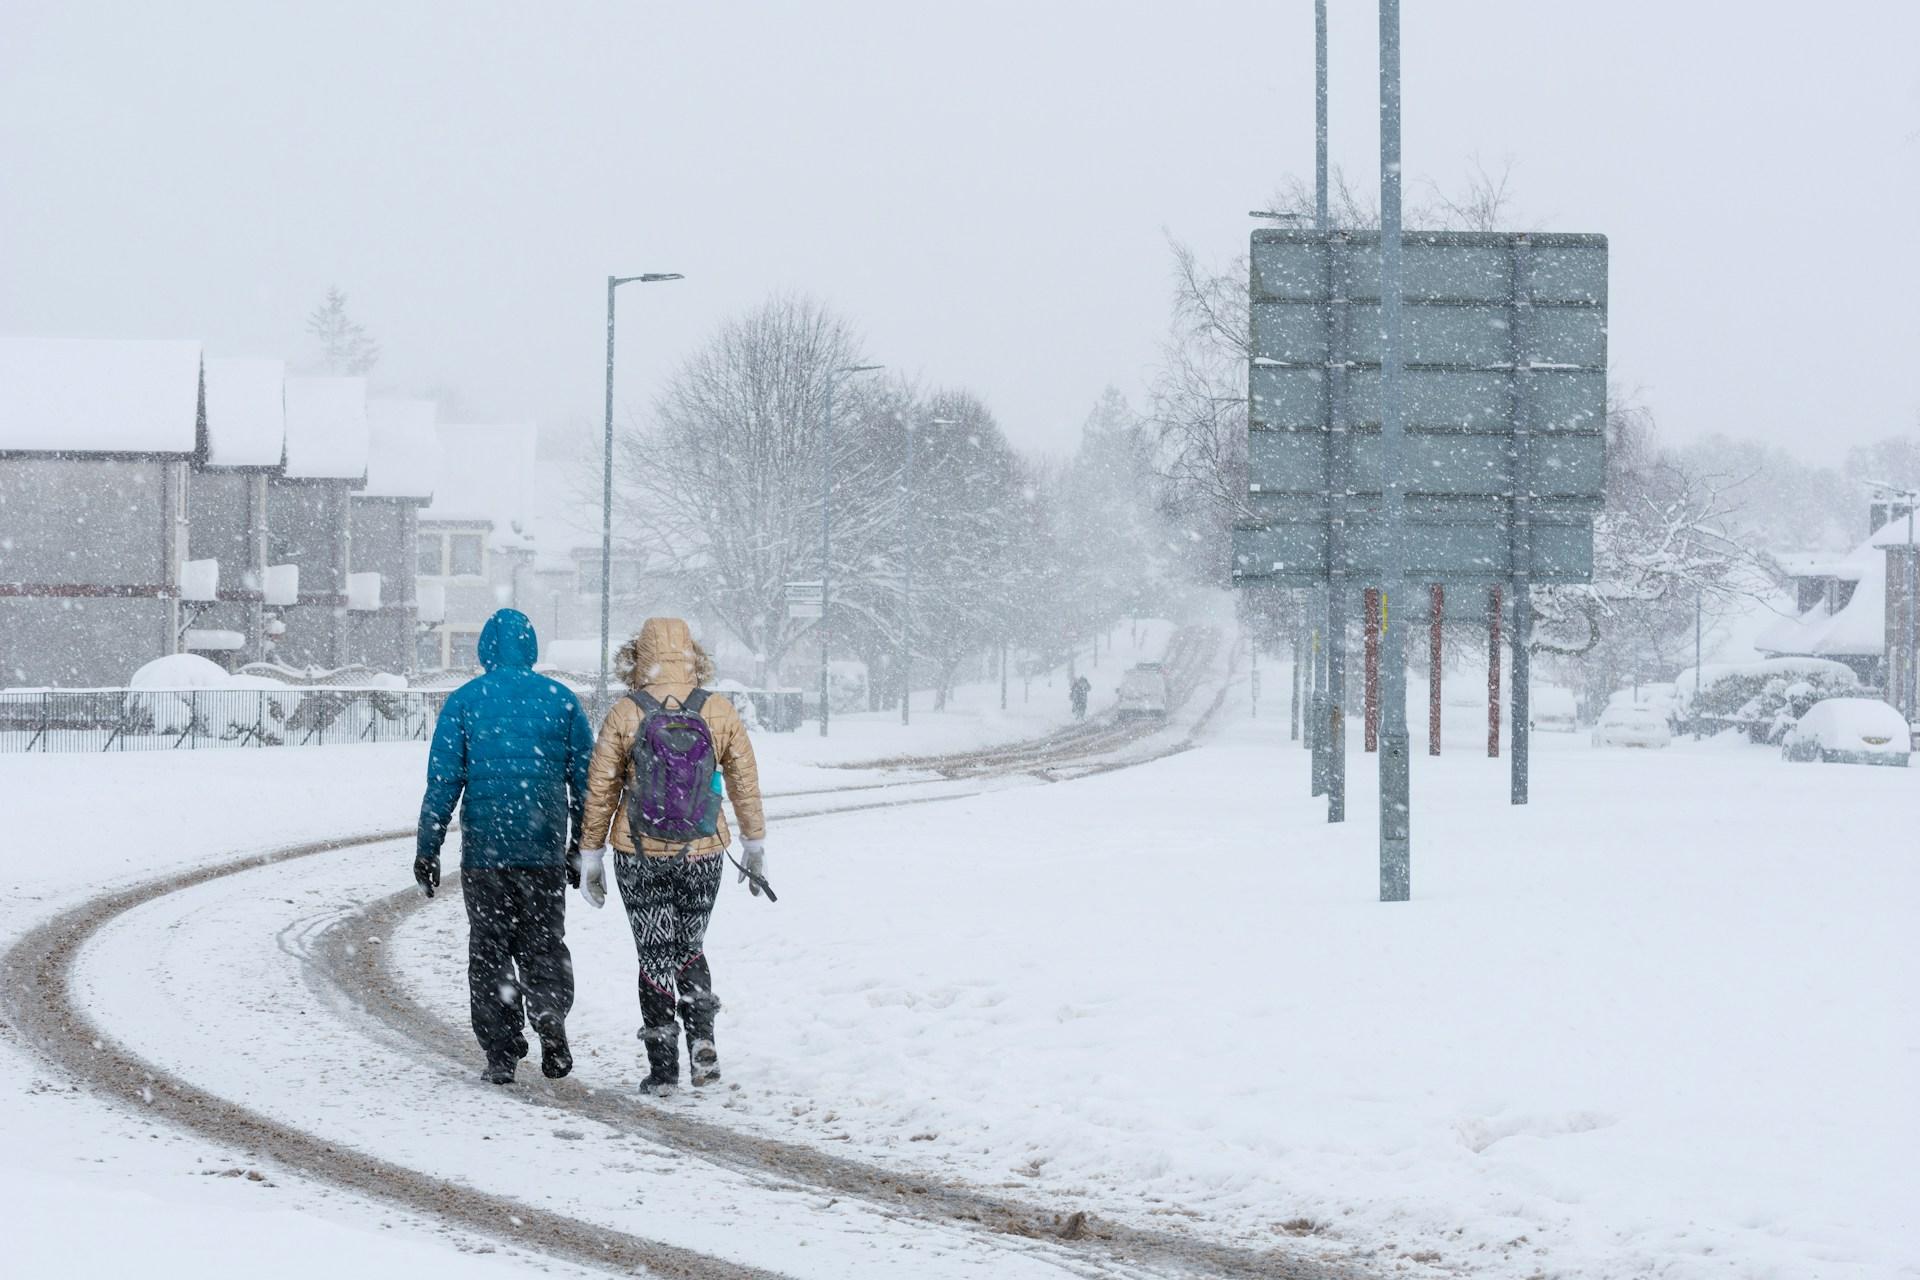 Health and safety in winter weather. Two people walking on a snow covered road